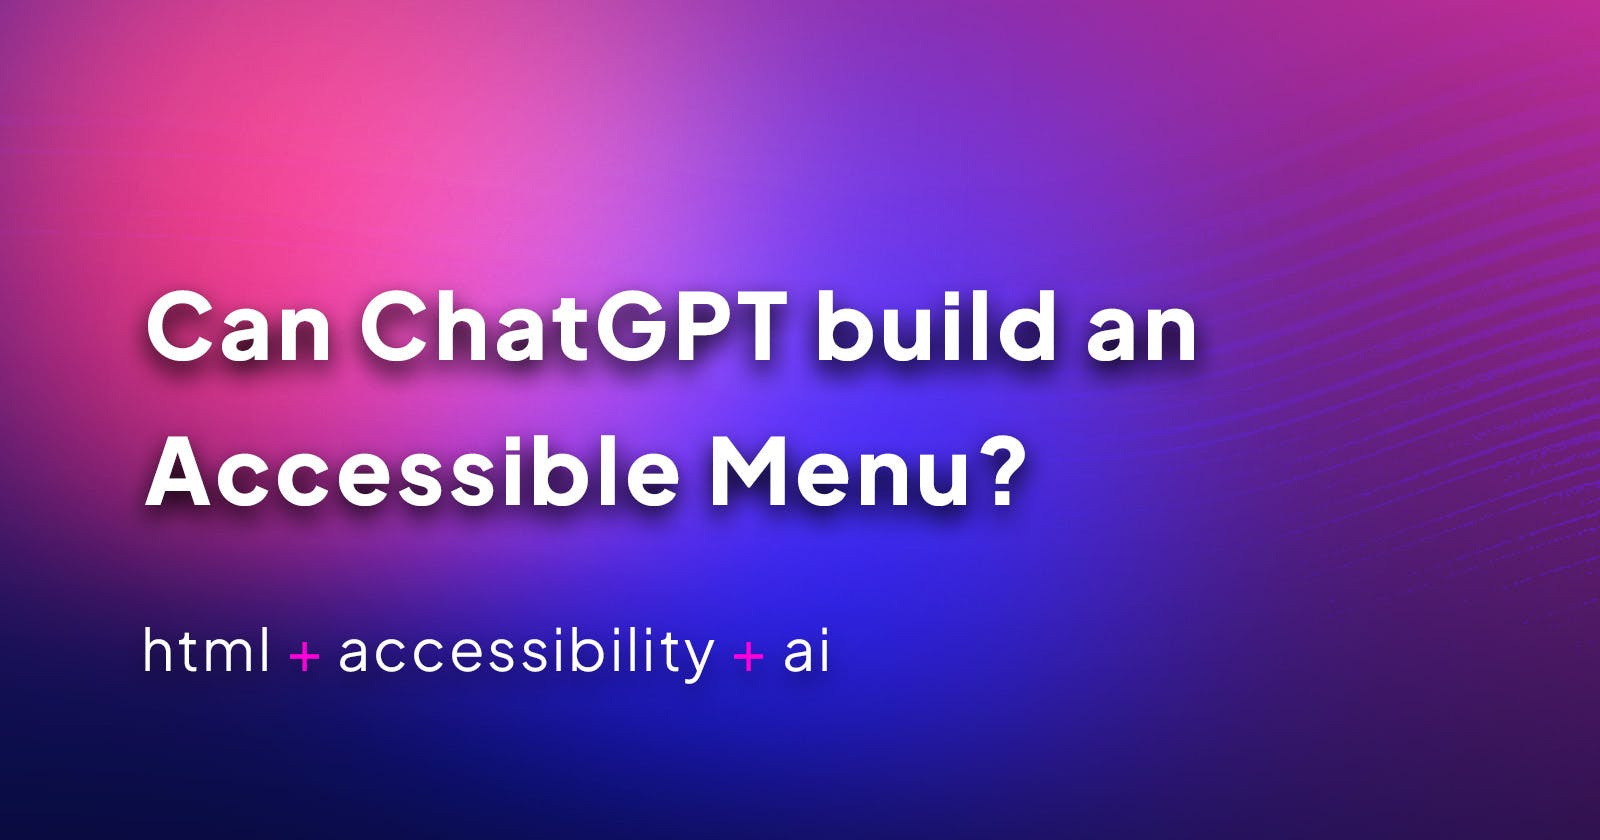 Can ChatGPT build an Accessible Menu?